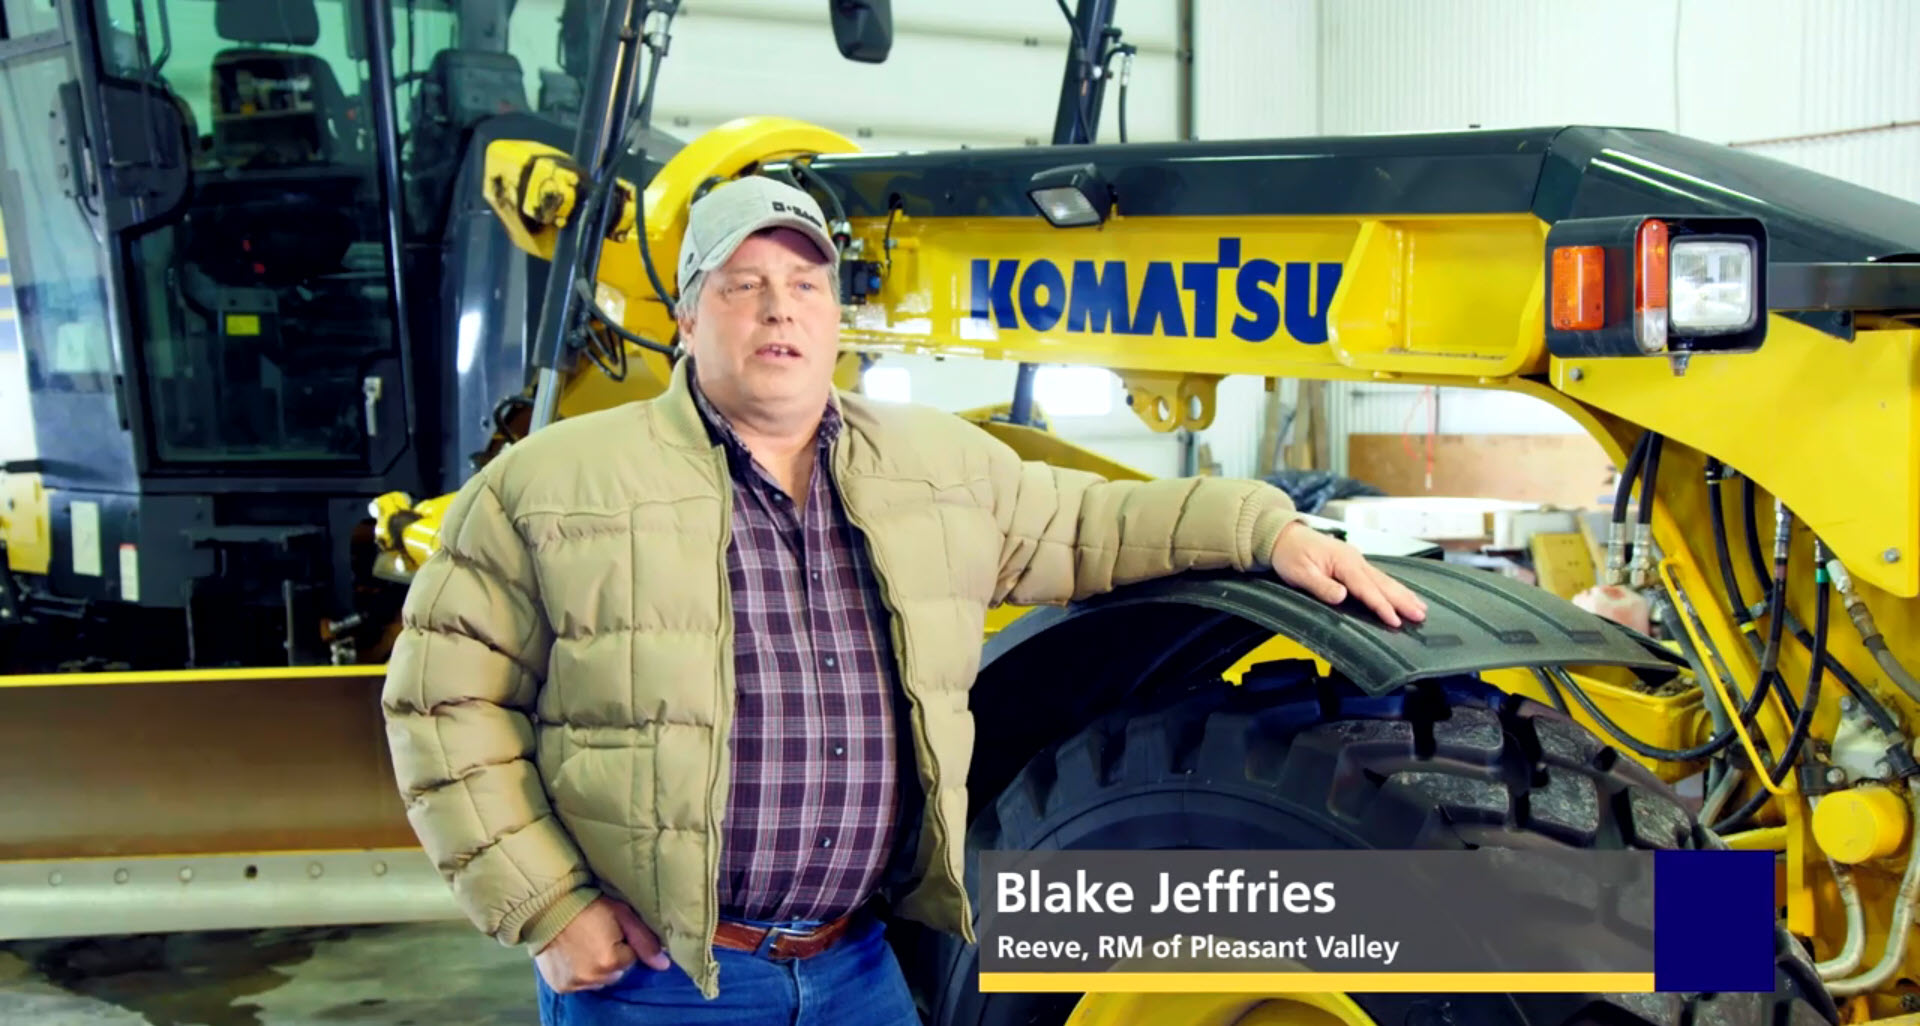 Blake Jeffries is Reeve of the Rural Municipality of Pleasant Valley, Saskatchewan. “When complaints come from ratepayers, I’m the guy who has to handle them,”